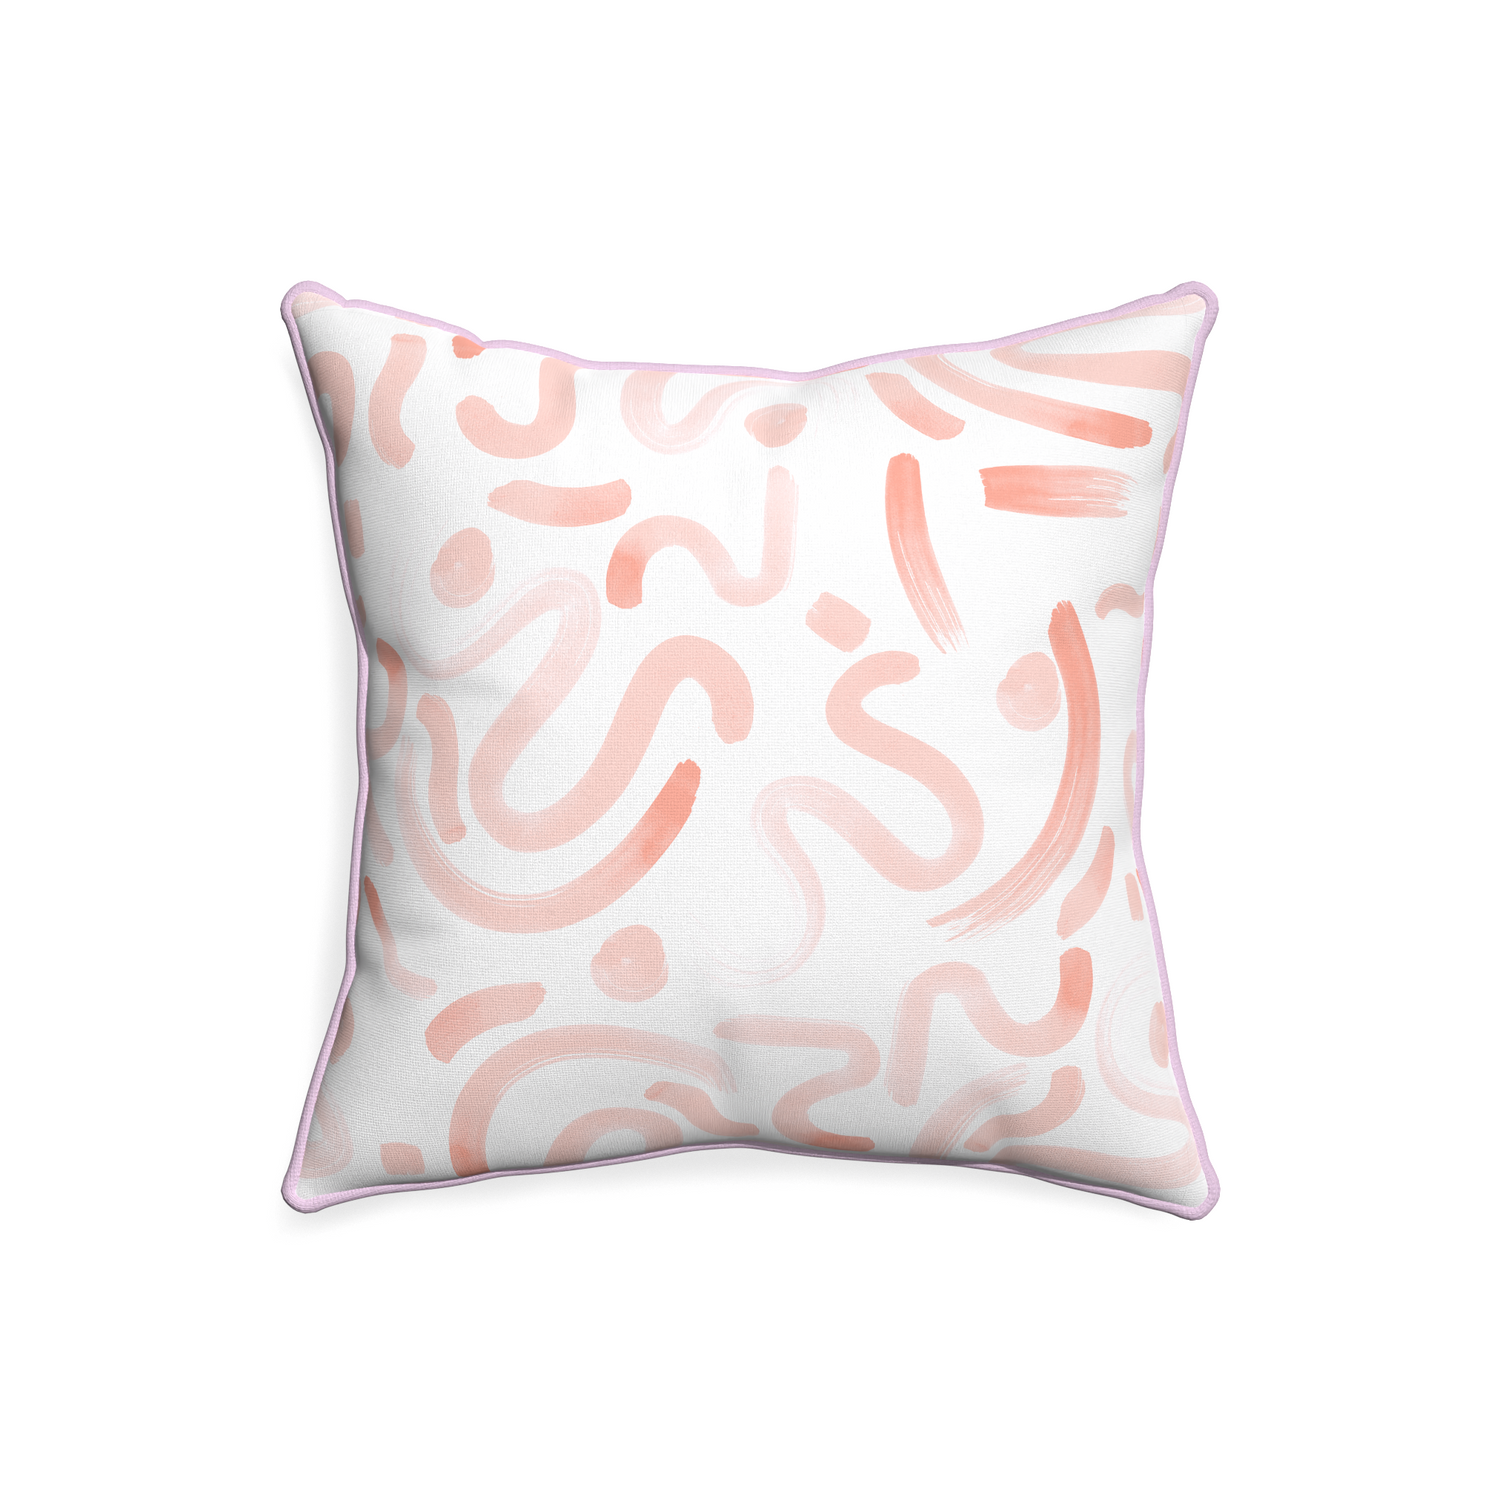 20-square hockney pink custom pillow with l piping on white background